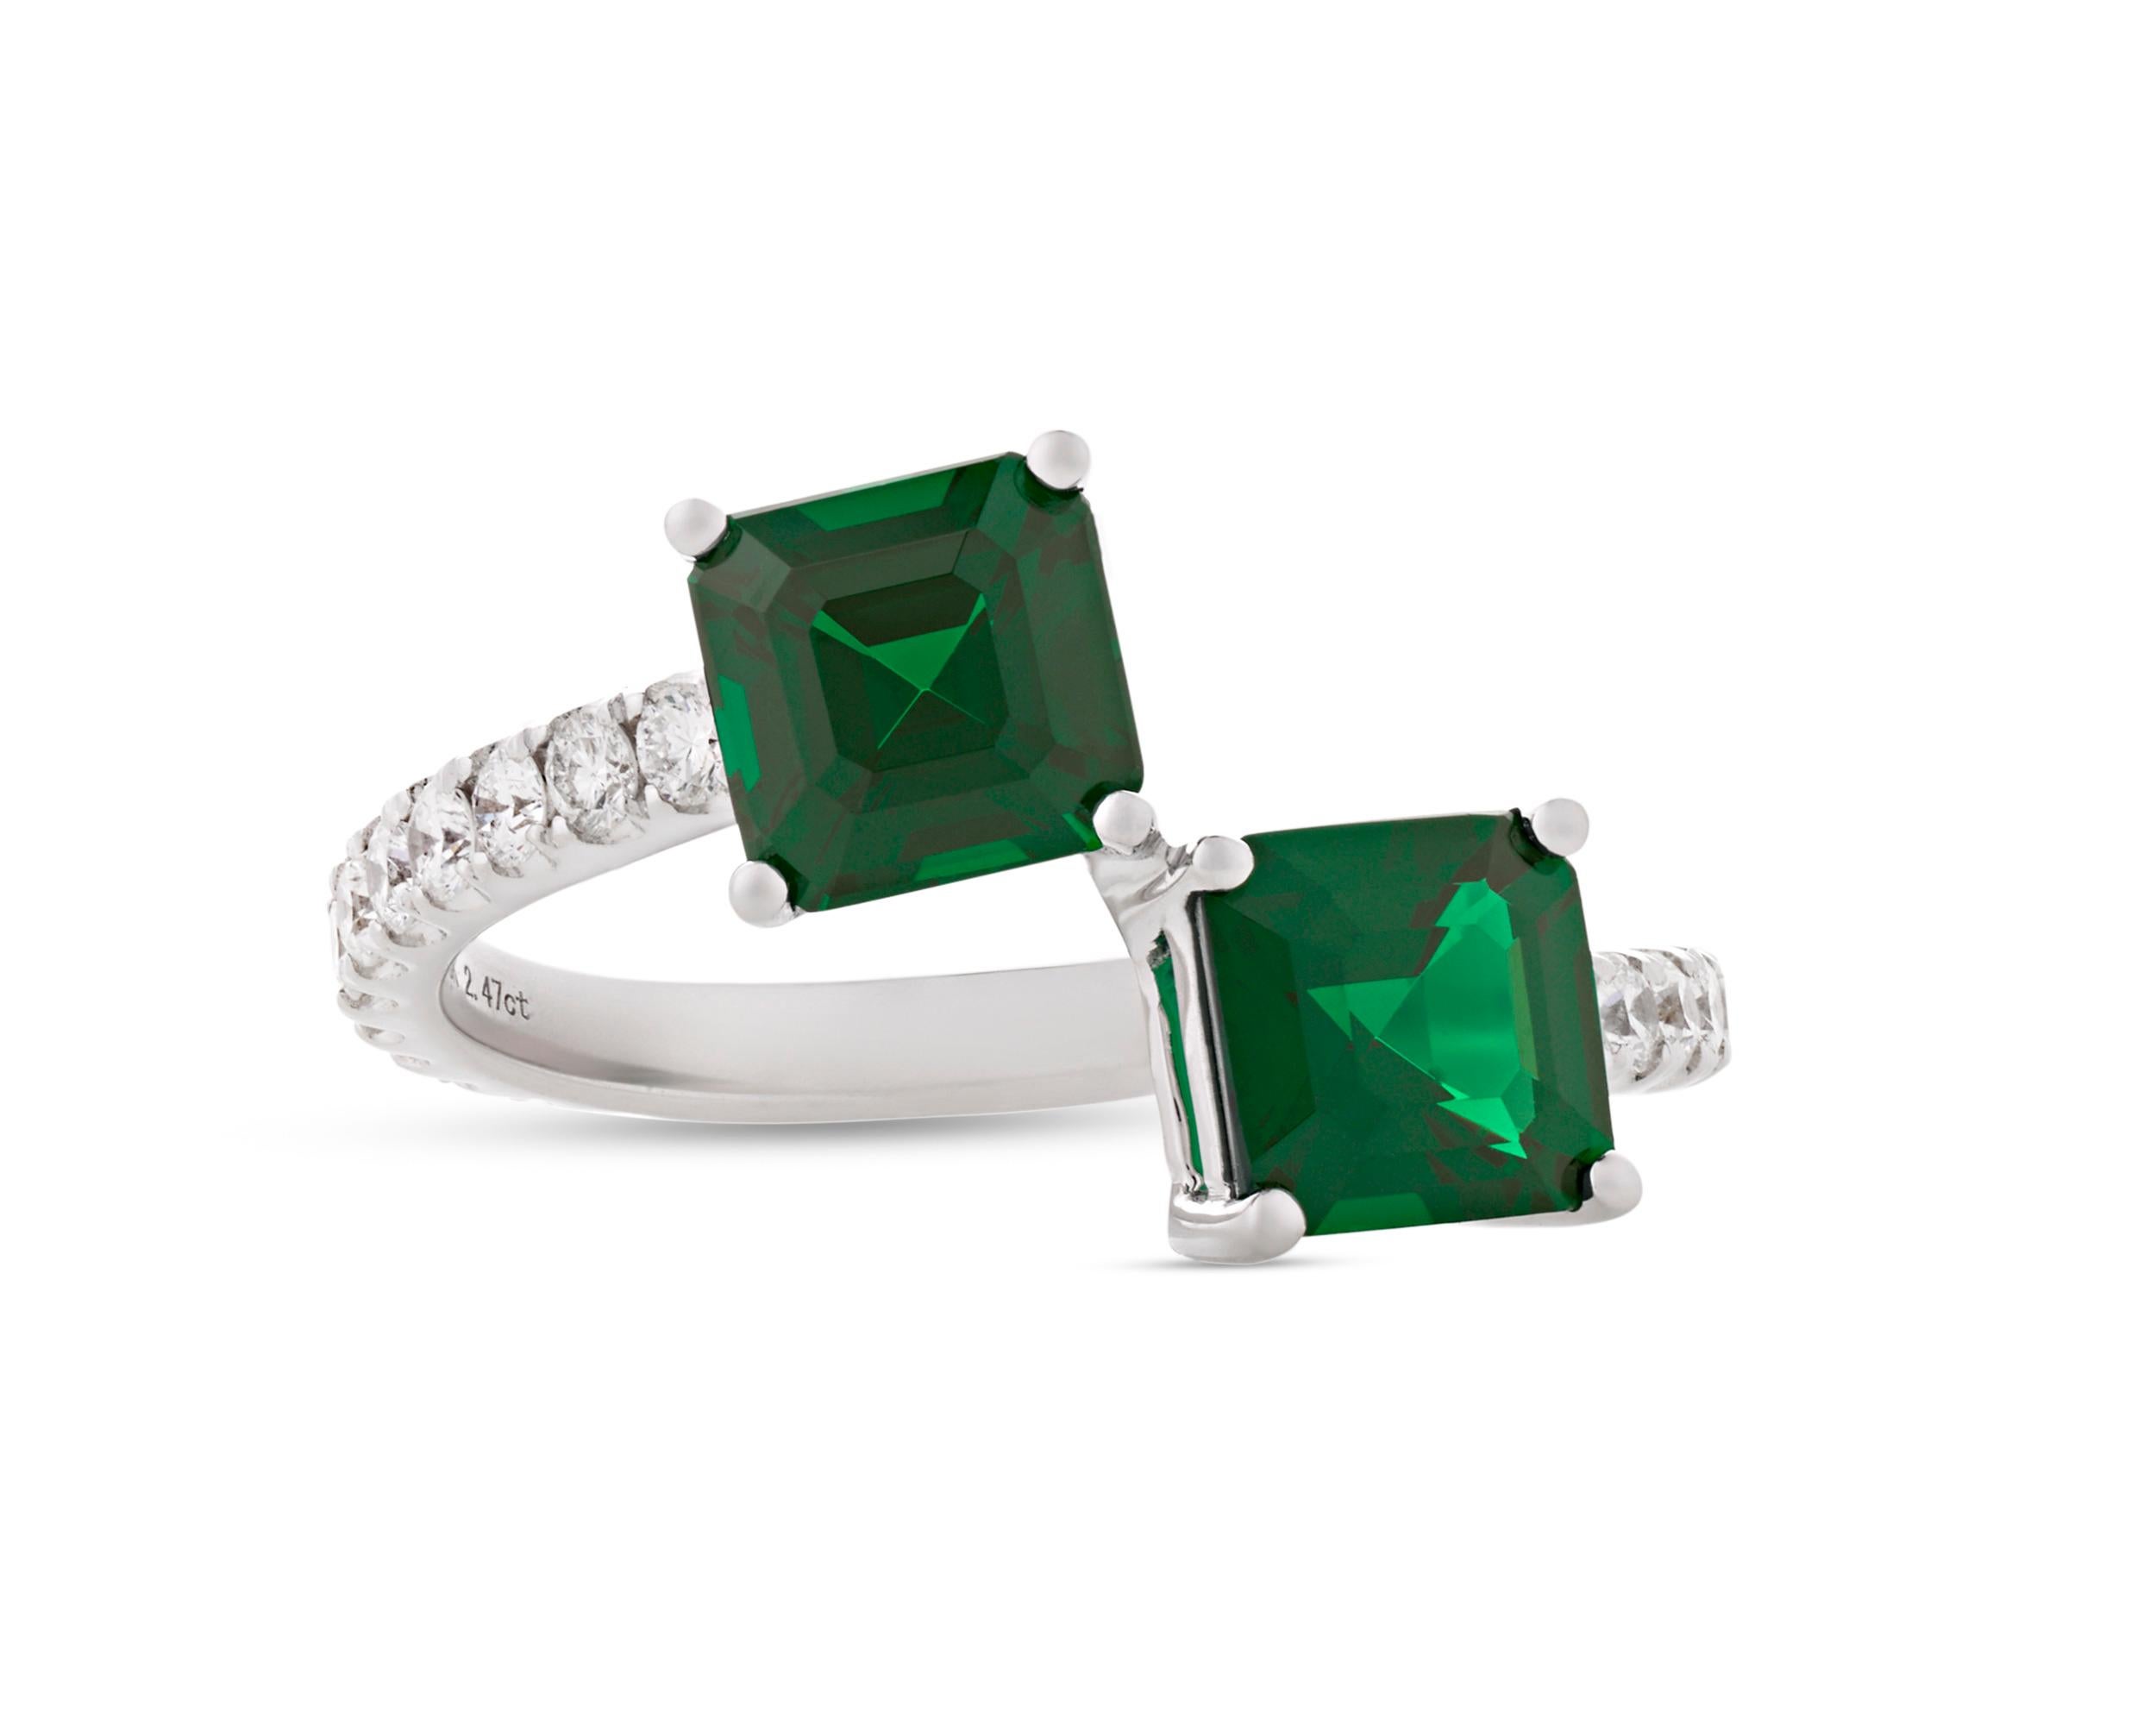 Asymmetrical yet perfectly balanced, this emerald bypass ring exudes sophistication. Weighing a combined 2.47 carats, the emeralds display a lush, deep green hue accentuated by the bright white of accent diamonds totaling 0.54 carat. Set in 18K